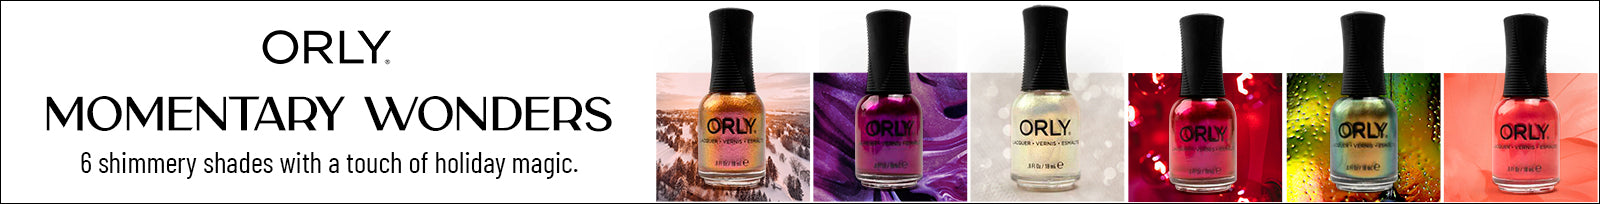 ORLY Momentary Wonders Holiday 2021 Collection